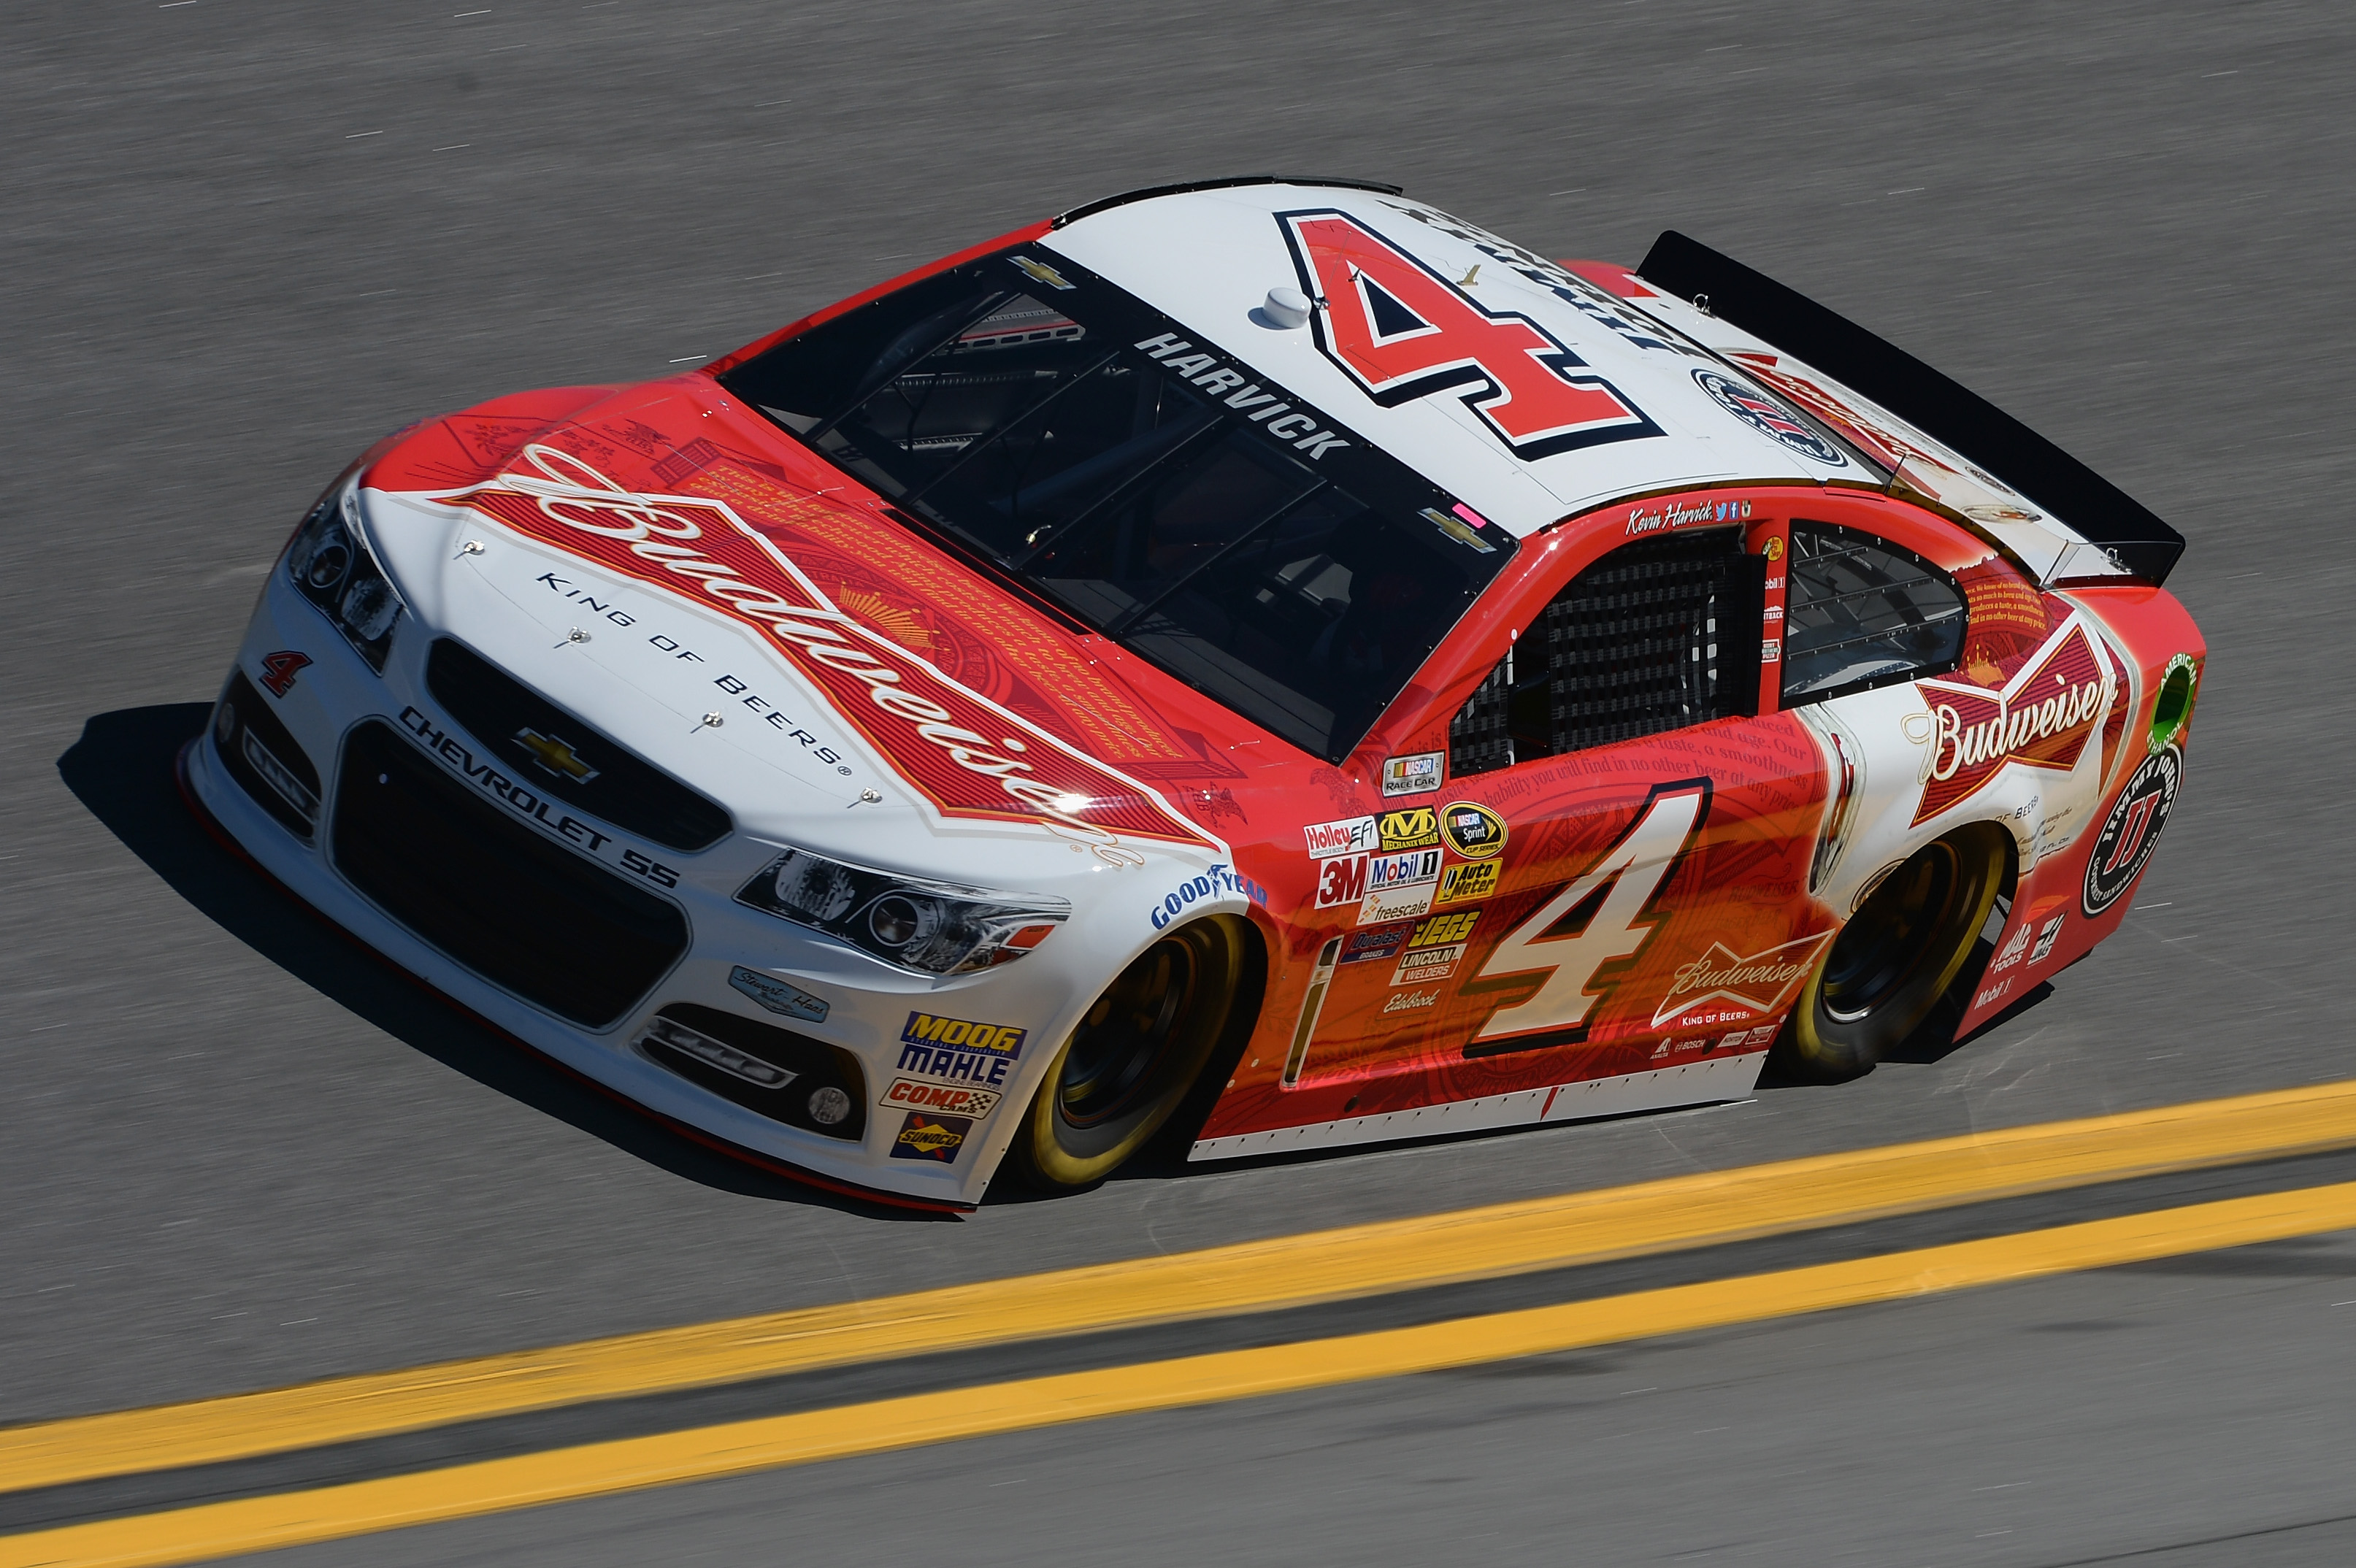 During Practice For The Nascar Sprint Cup Series Daytona At